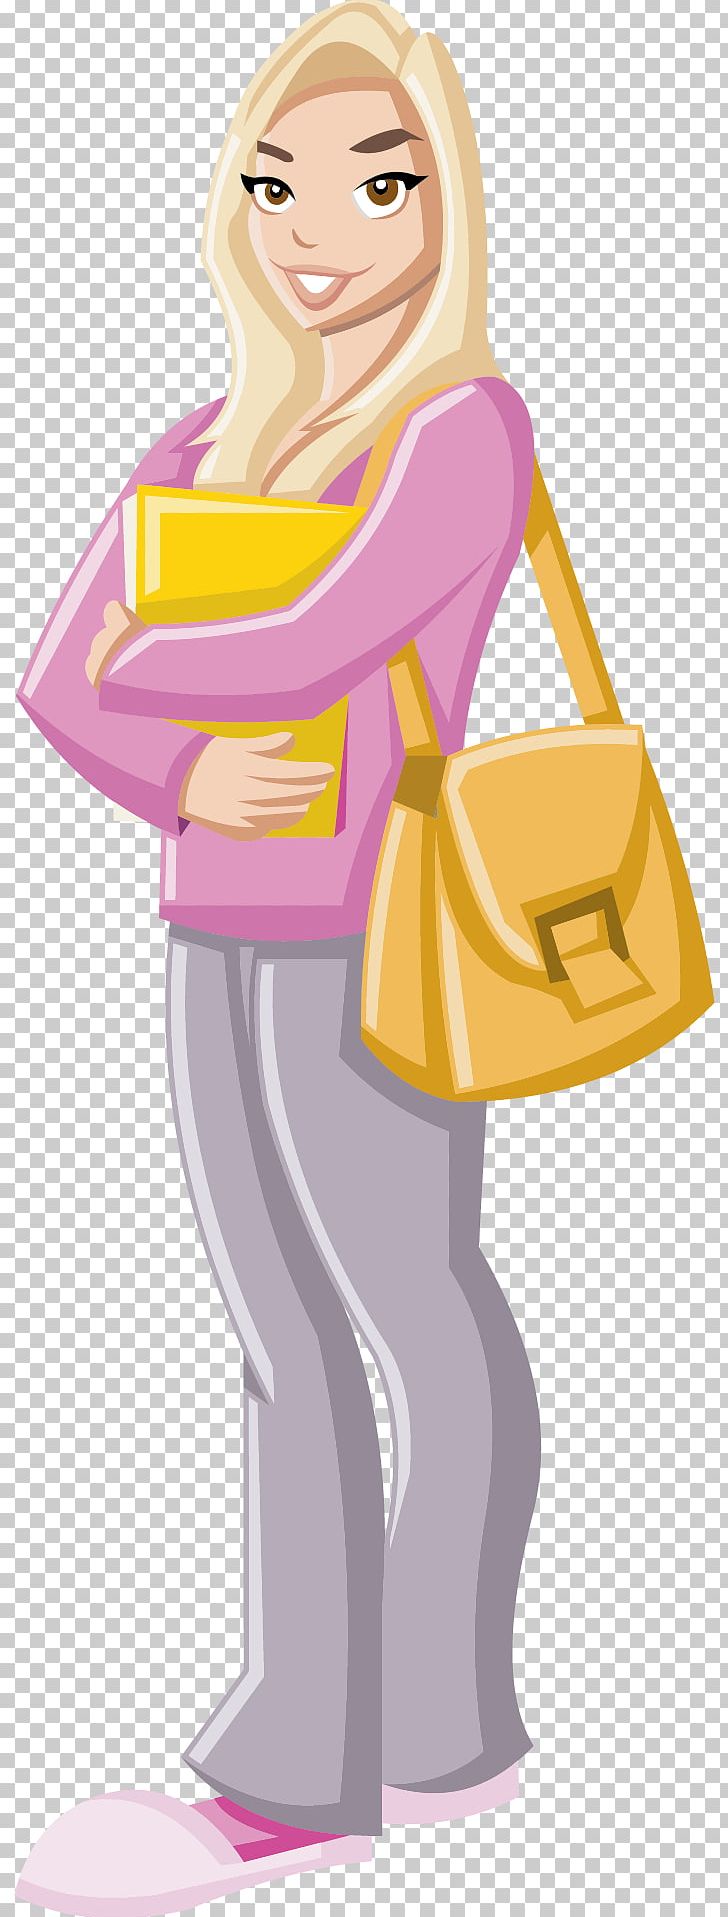 Student Woman Illustration PNG, Clipart, Arm, Art, Cartoon, Celebrities, Child Free PNG Download